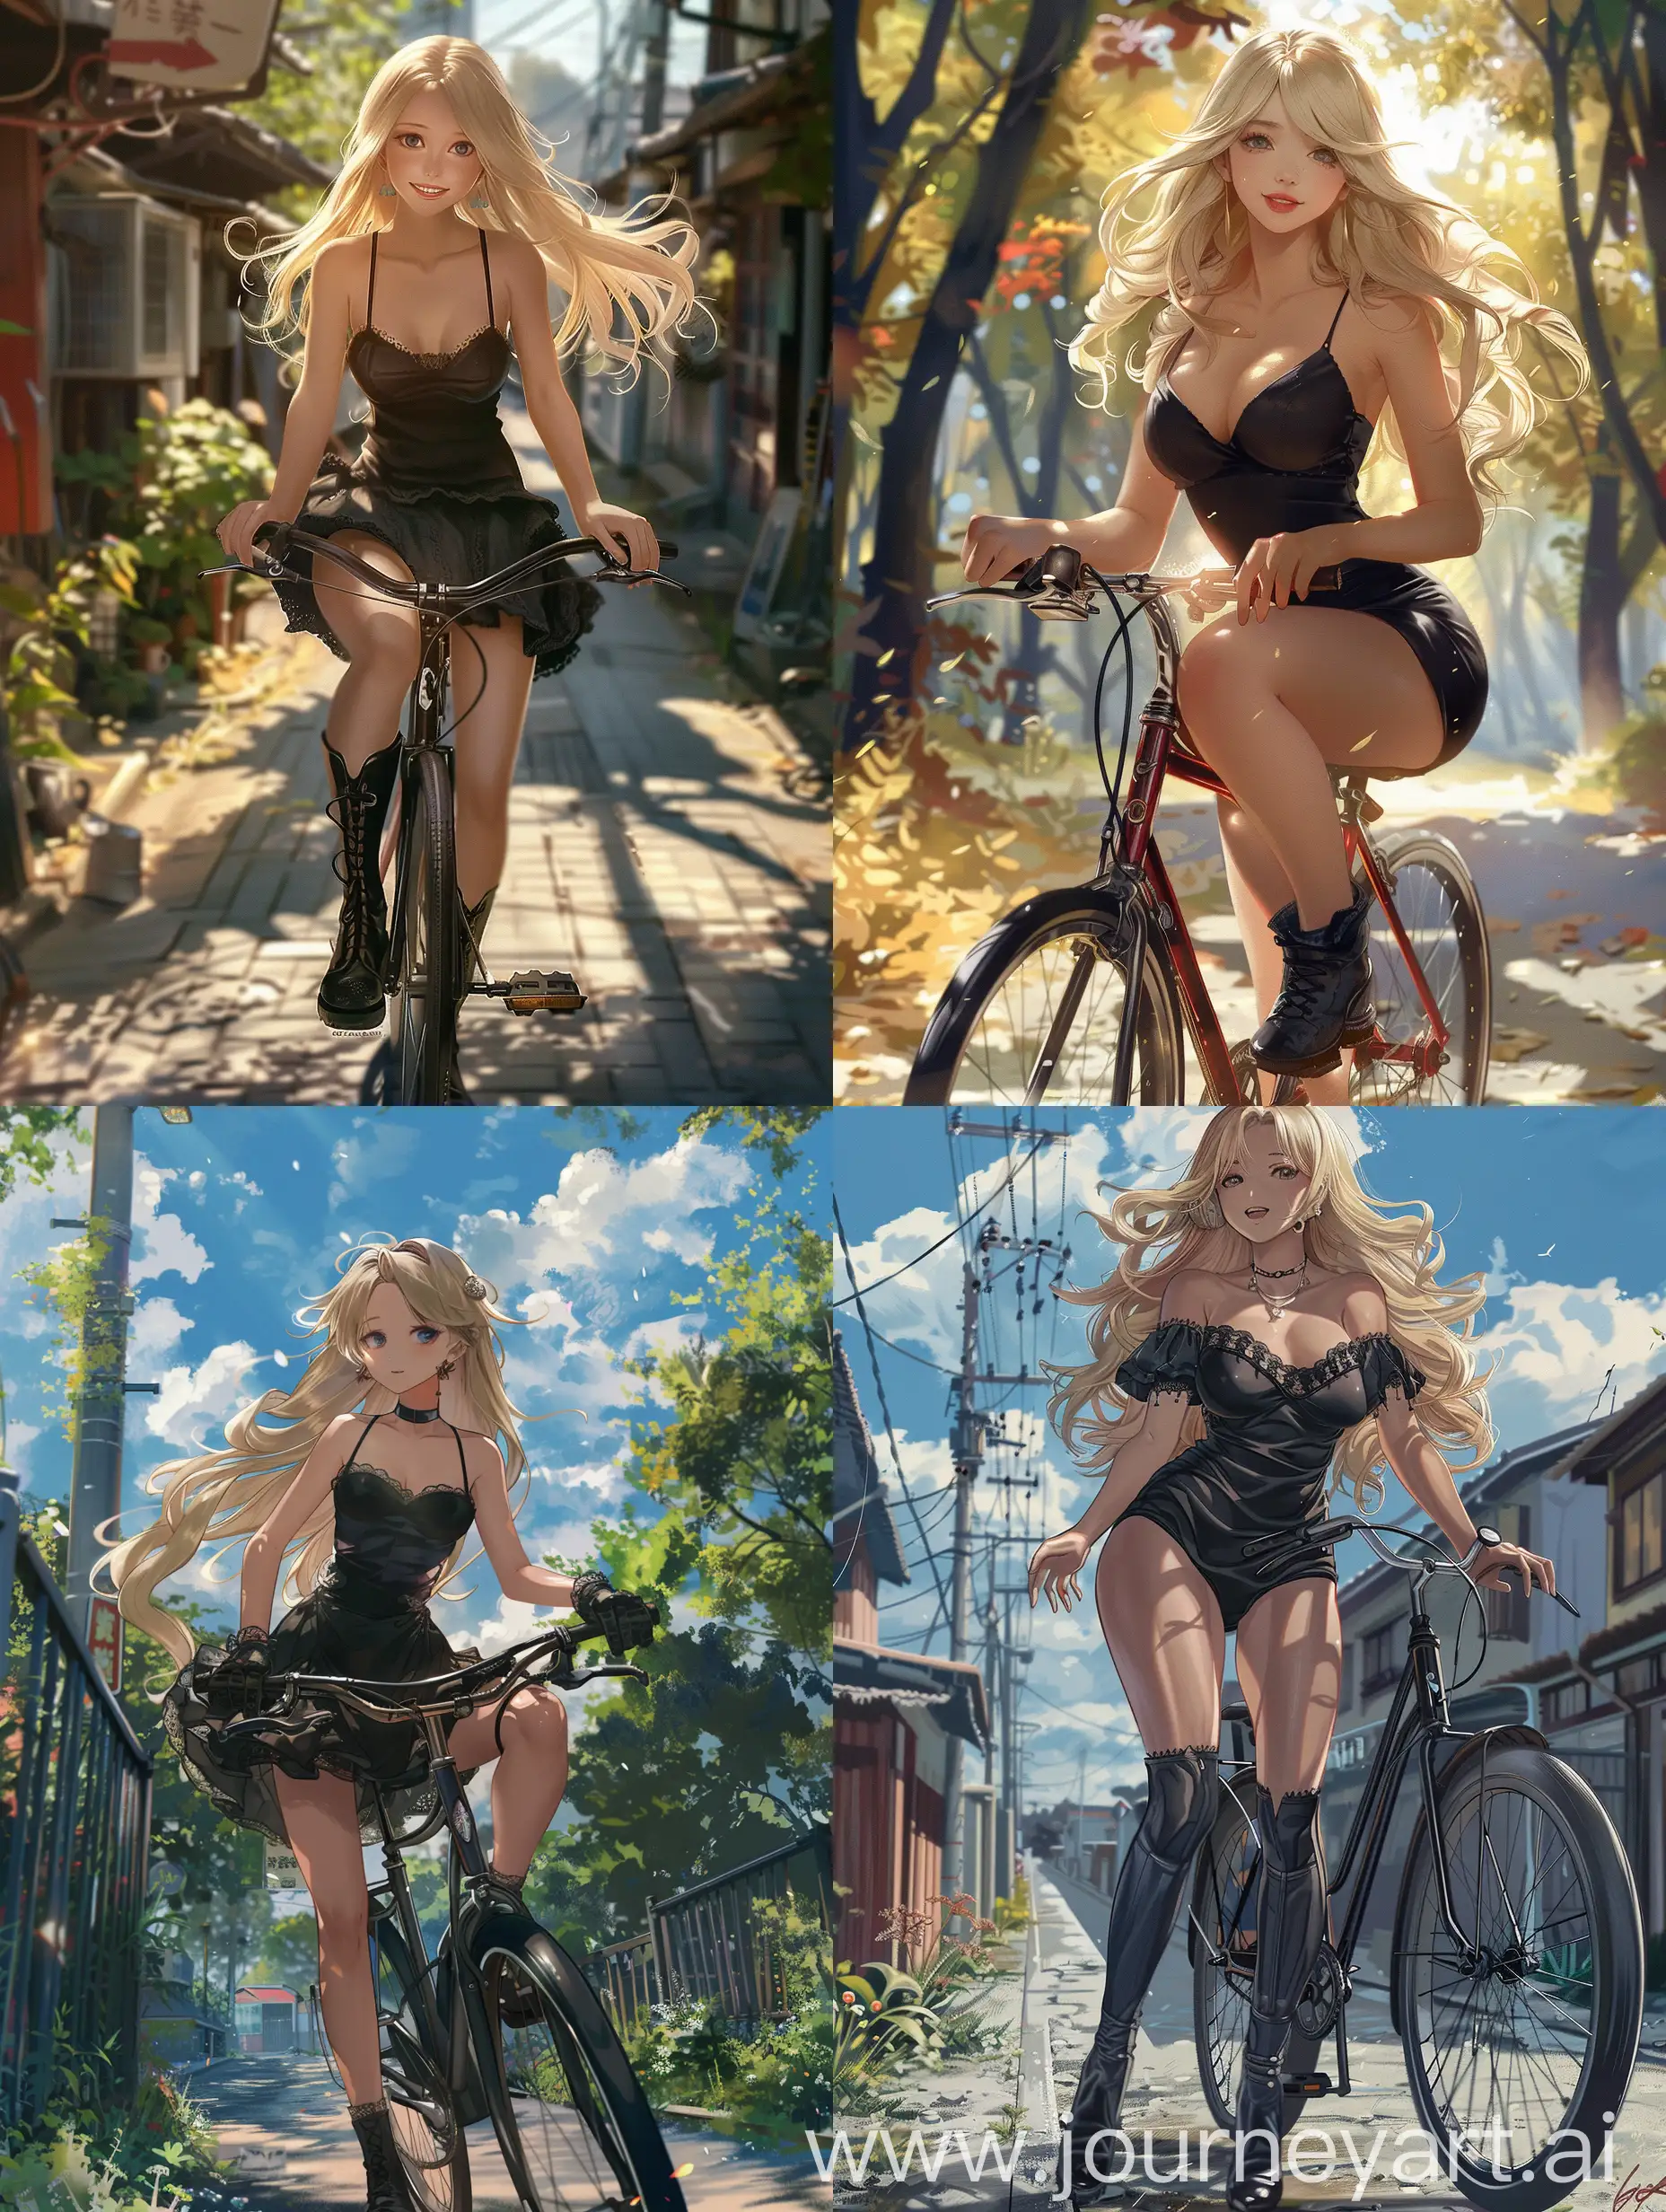 1 girl , 22 years old, blonde hair, black dress, sunny day, on bicycle, fat legs, no effects, no filters, front view, smiling , black boots